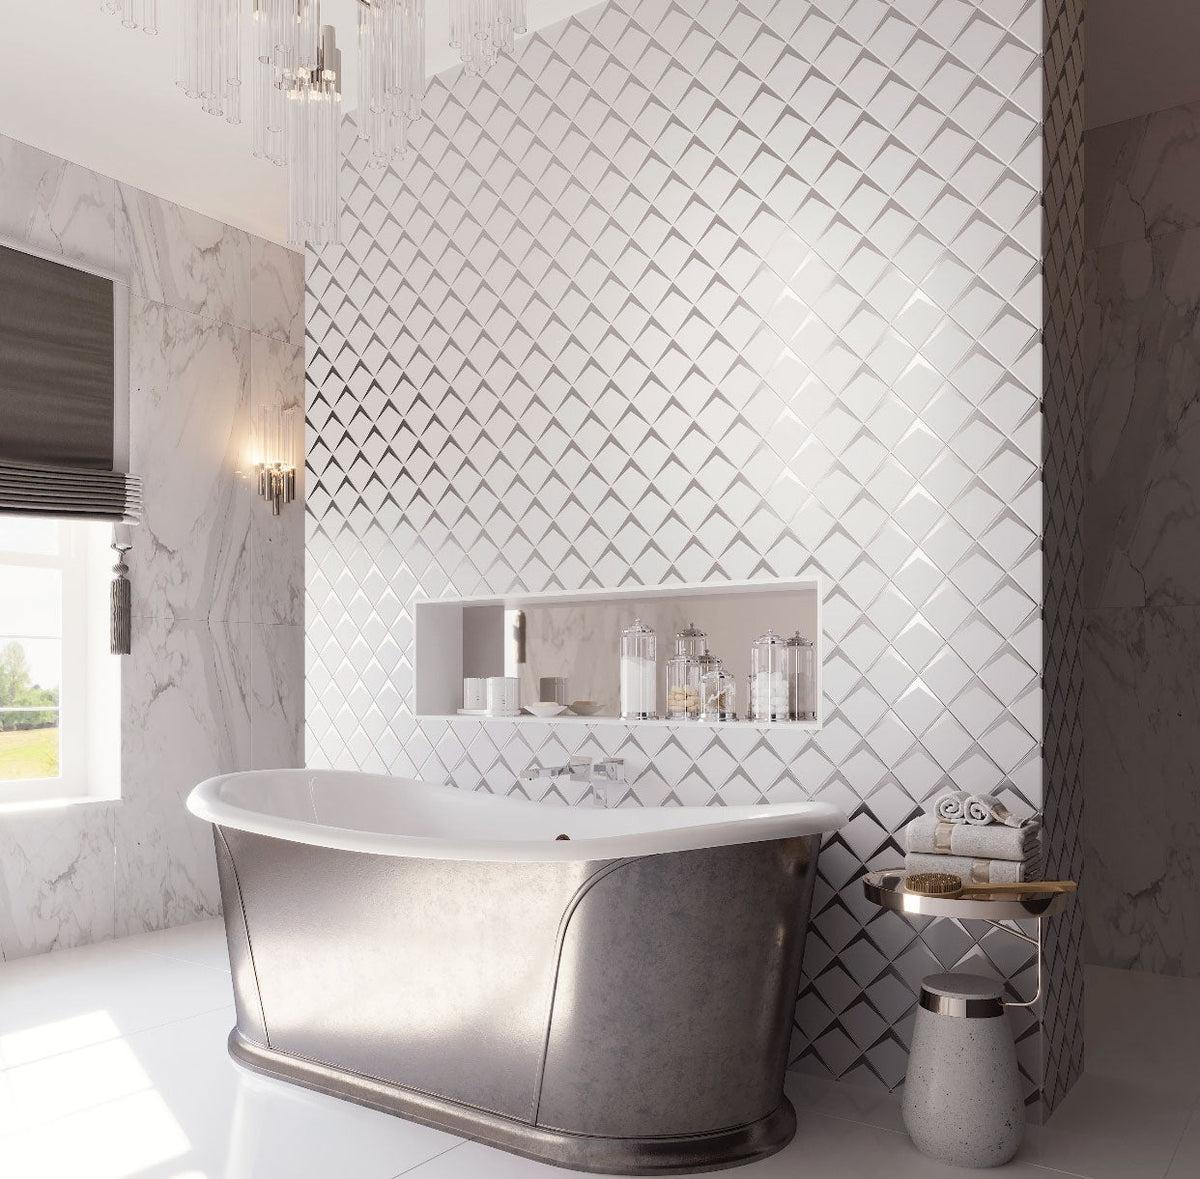 Luxury Bathroom Design with White Frost Diamond Glass Mosaic Tile Wall TIles